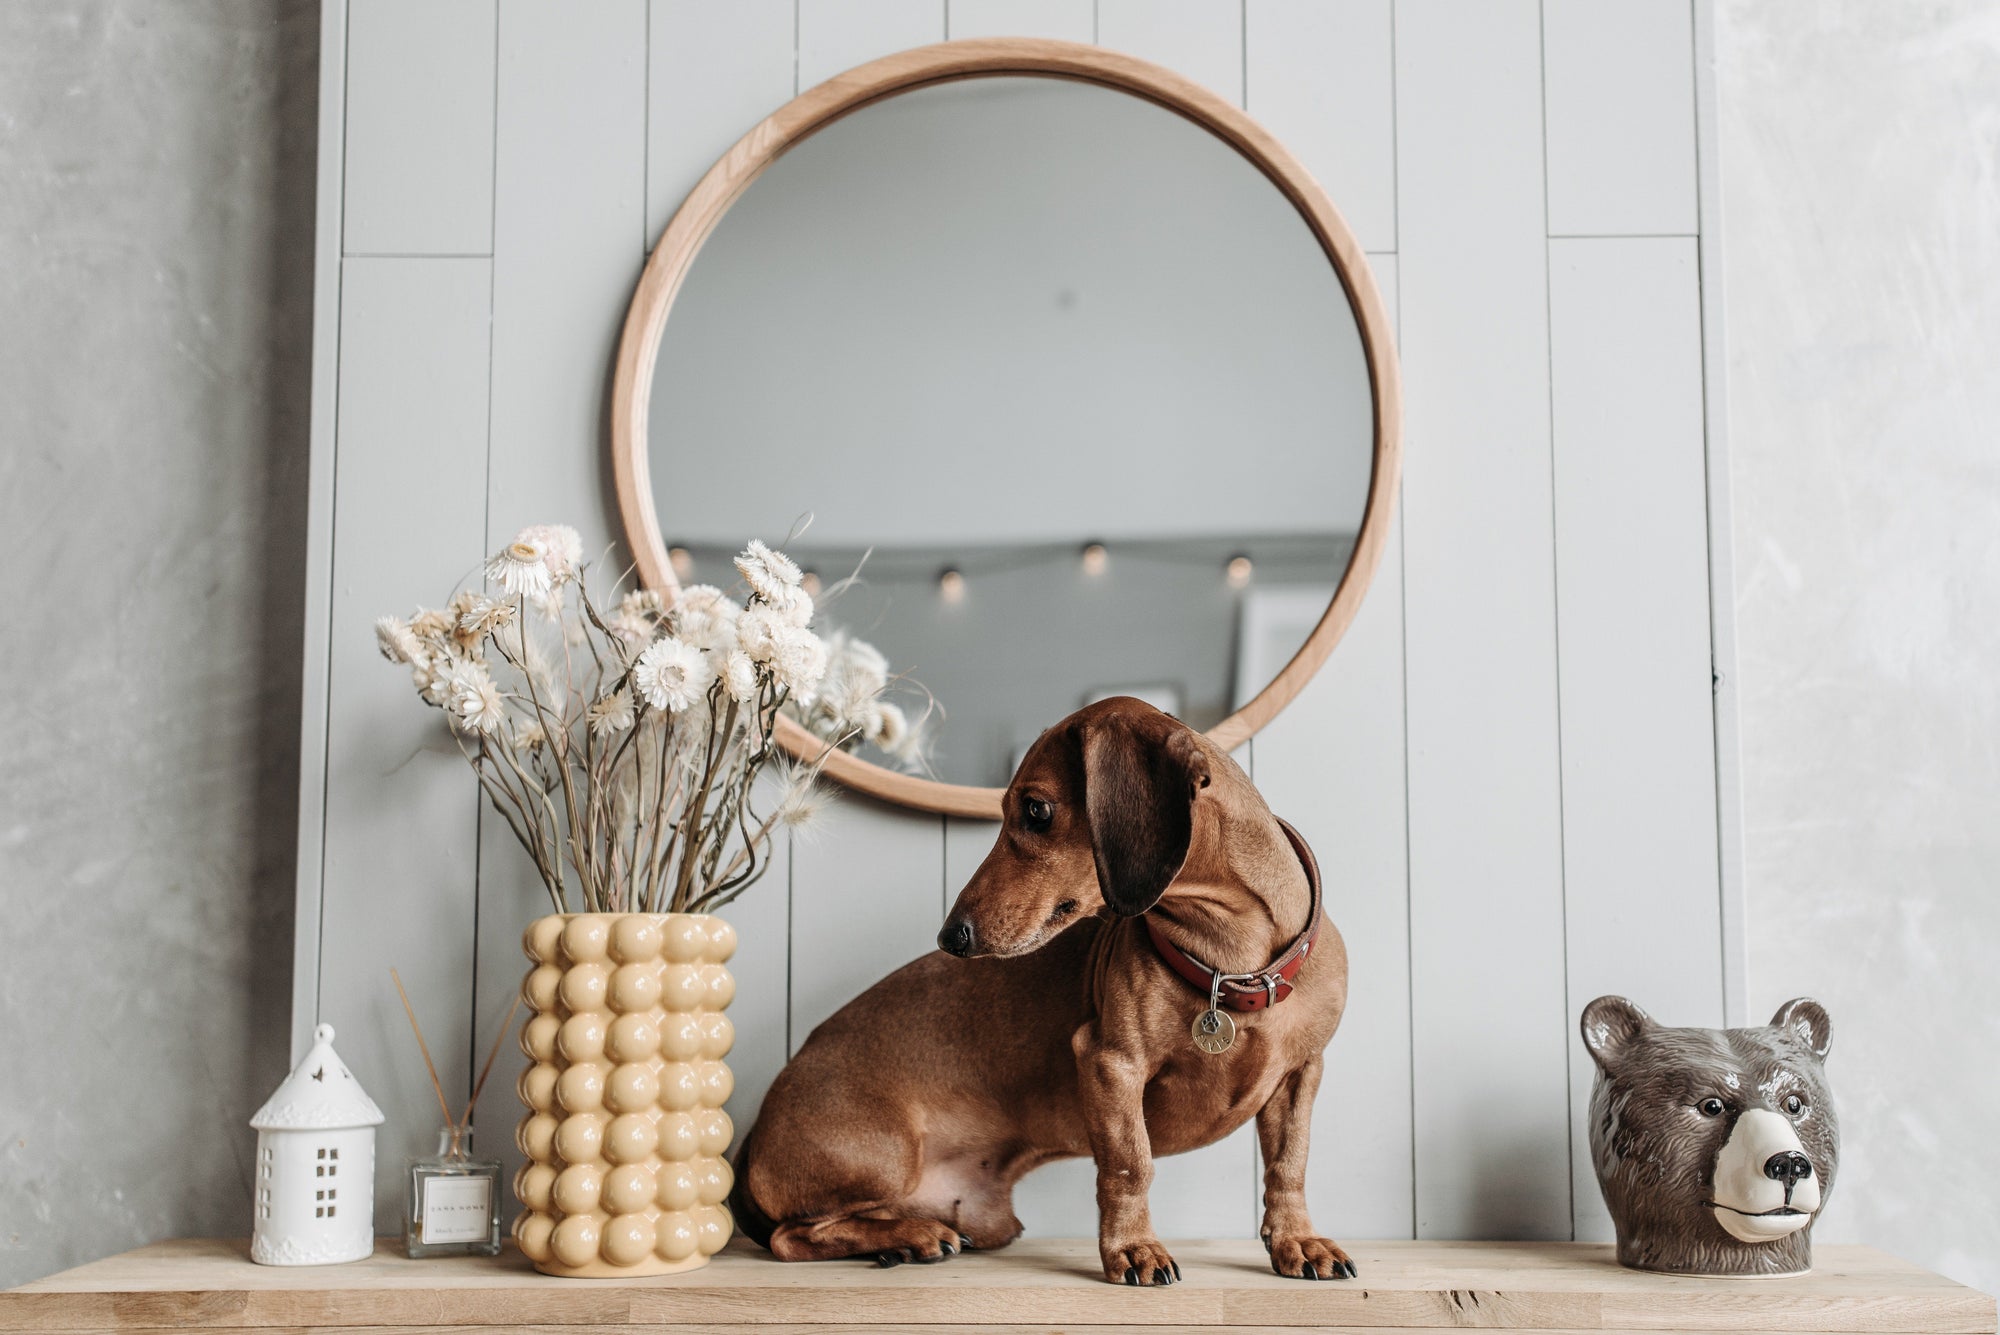 Florals for Spring? How to pick fur-baby-friendly florals for your home - KindTail